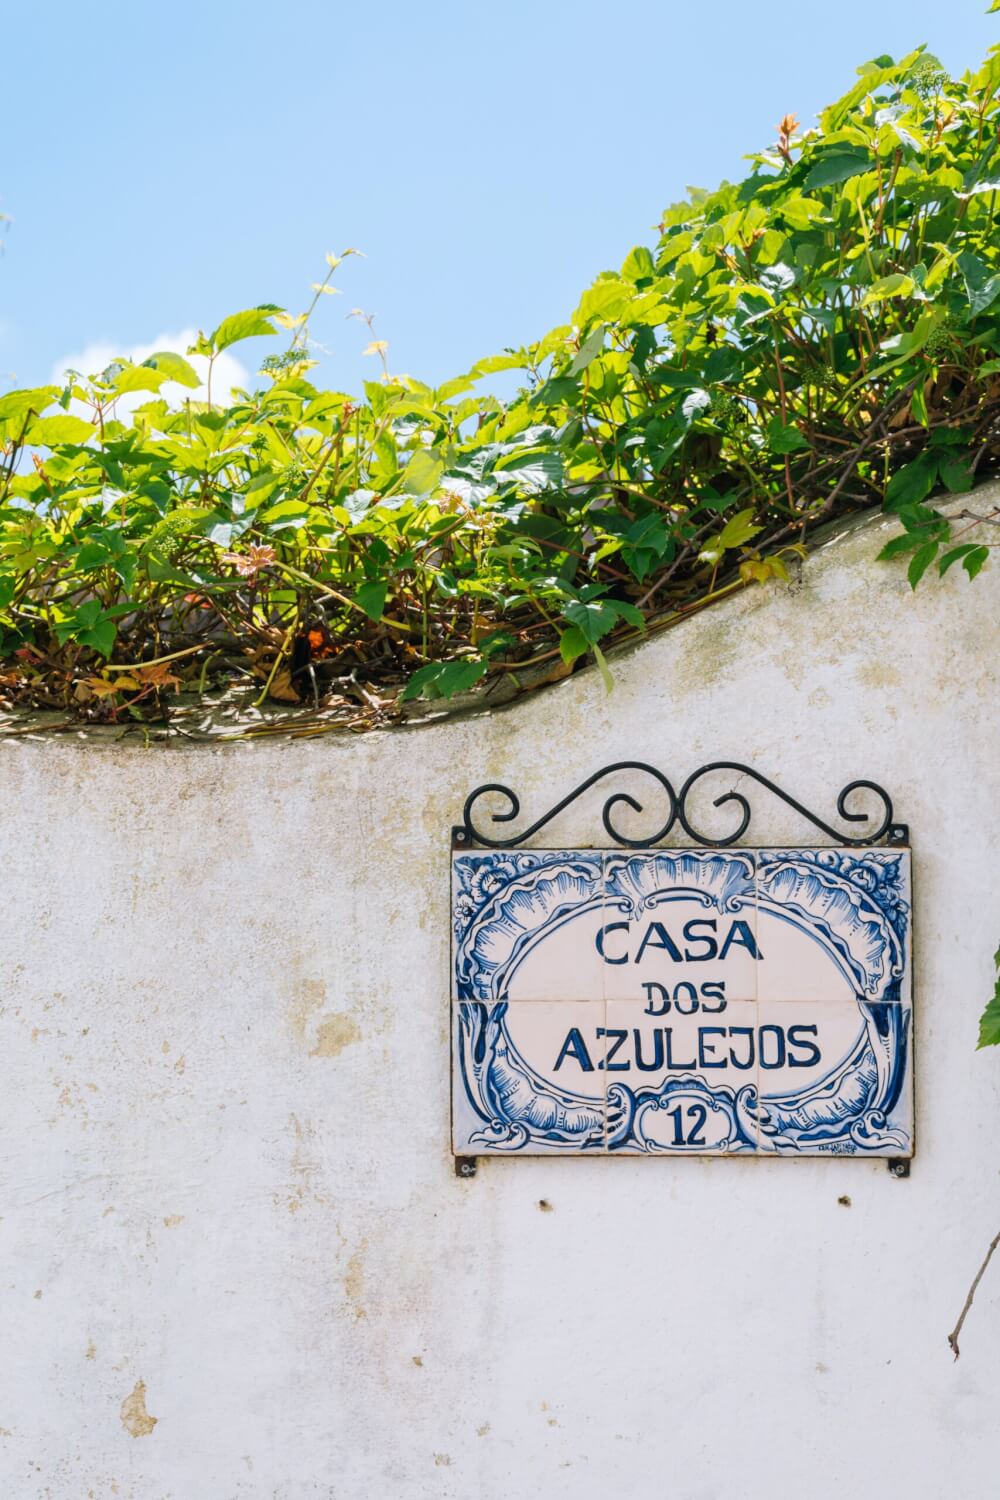 A hand painted ceramic sign that says "Casa Dos Azulejos"